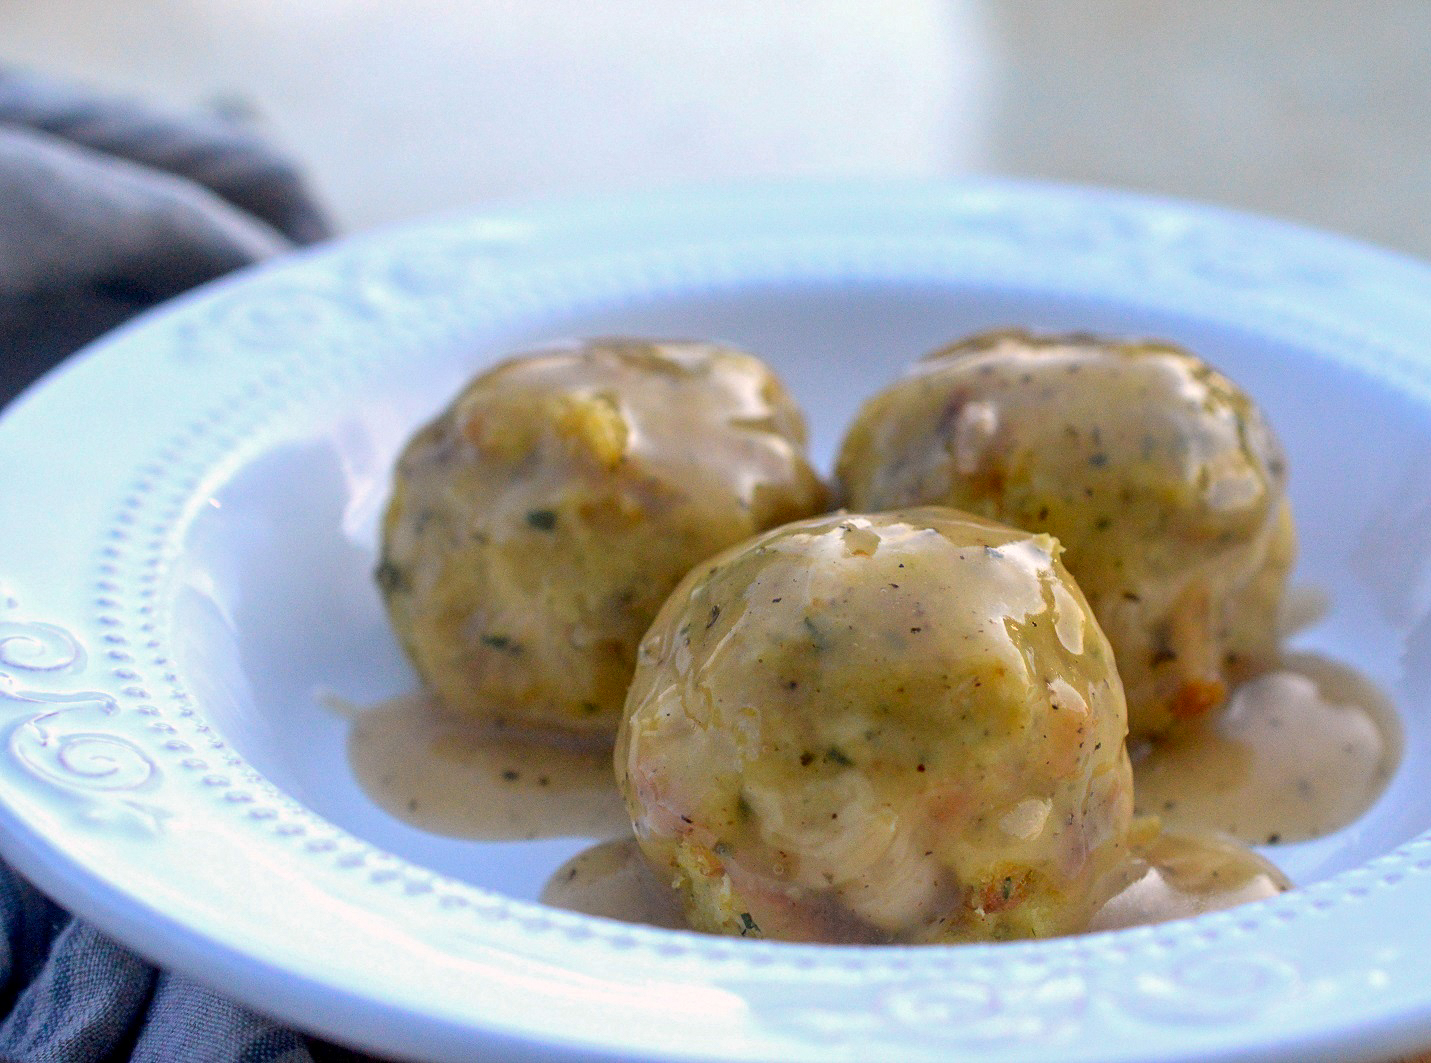 Thanksgiving leftovers recipe - Turkey Balls made with leftover turkey, mashed potatoes, stuffing and gravy! So good you'll make them just because too!